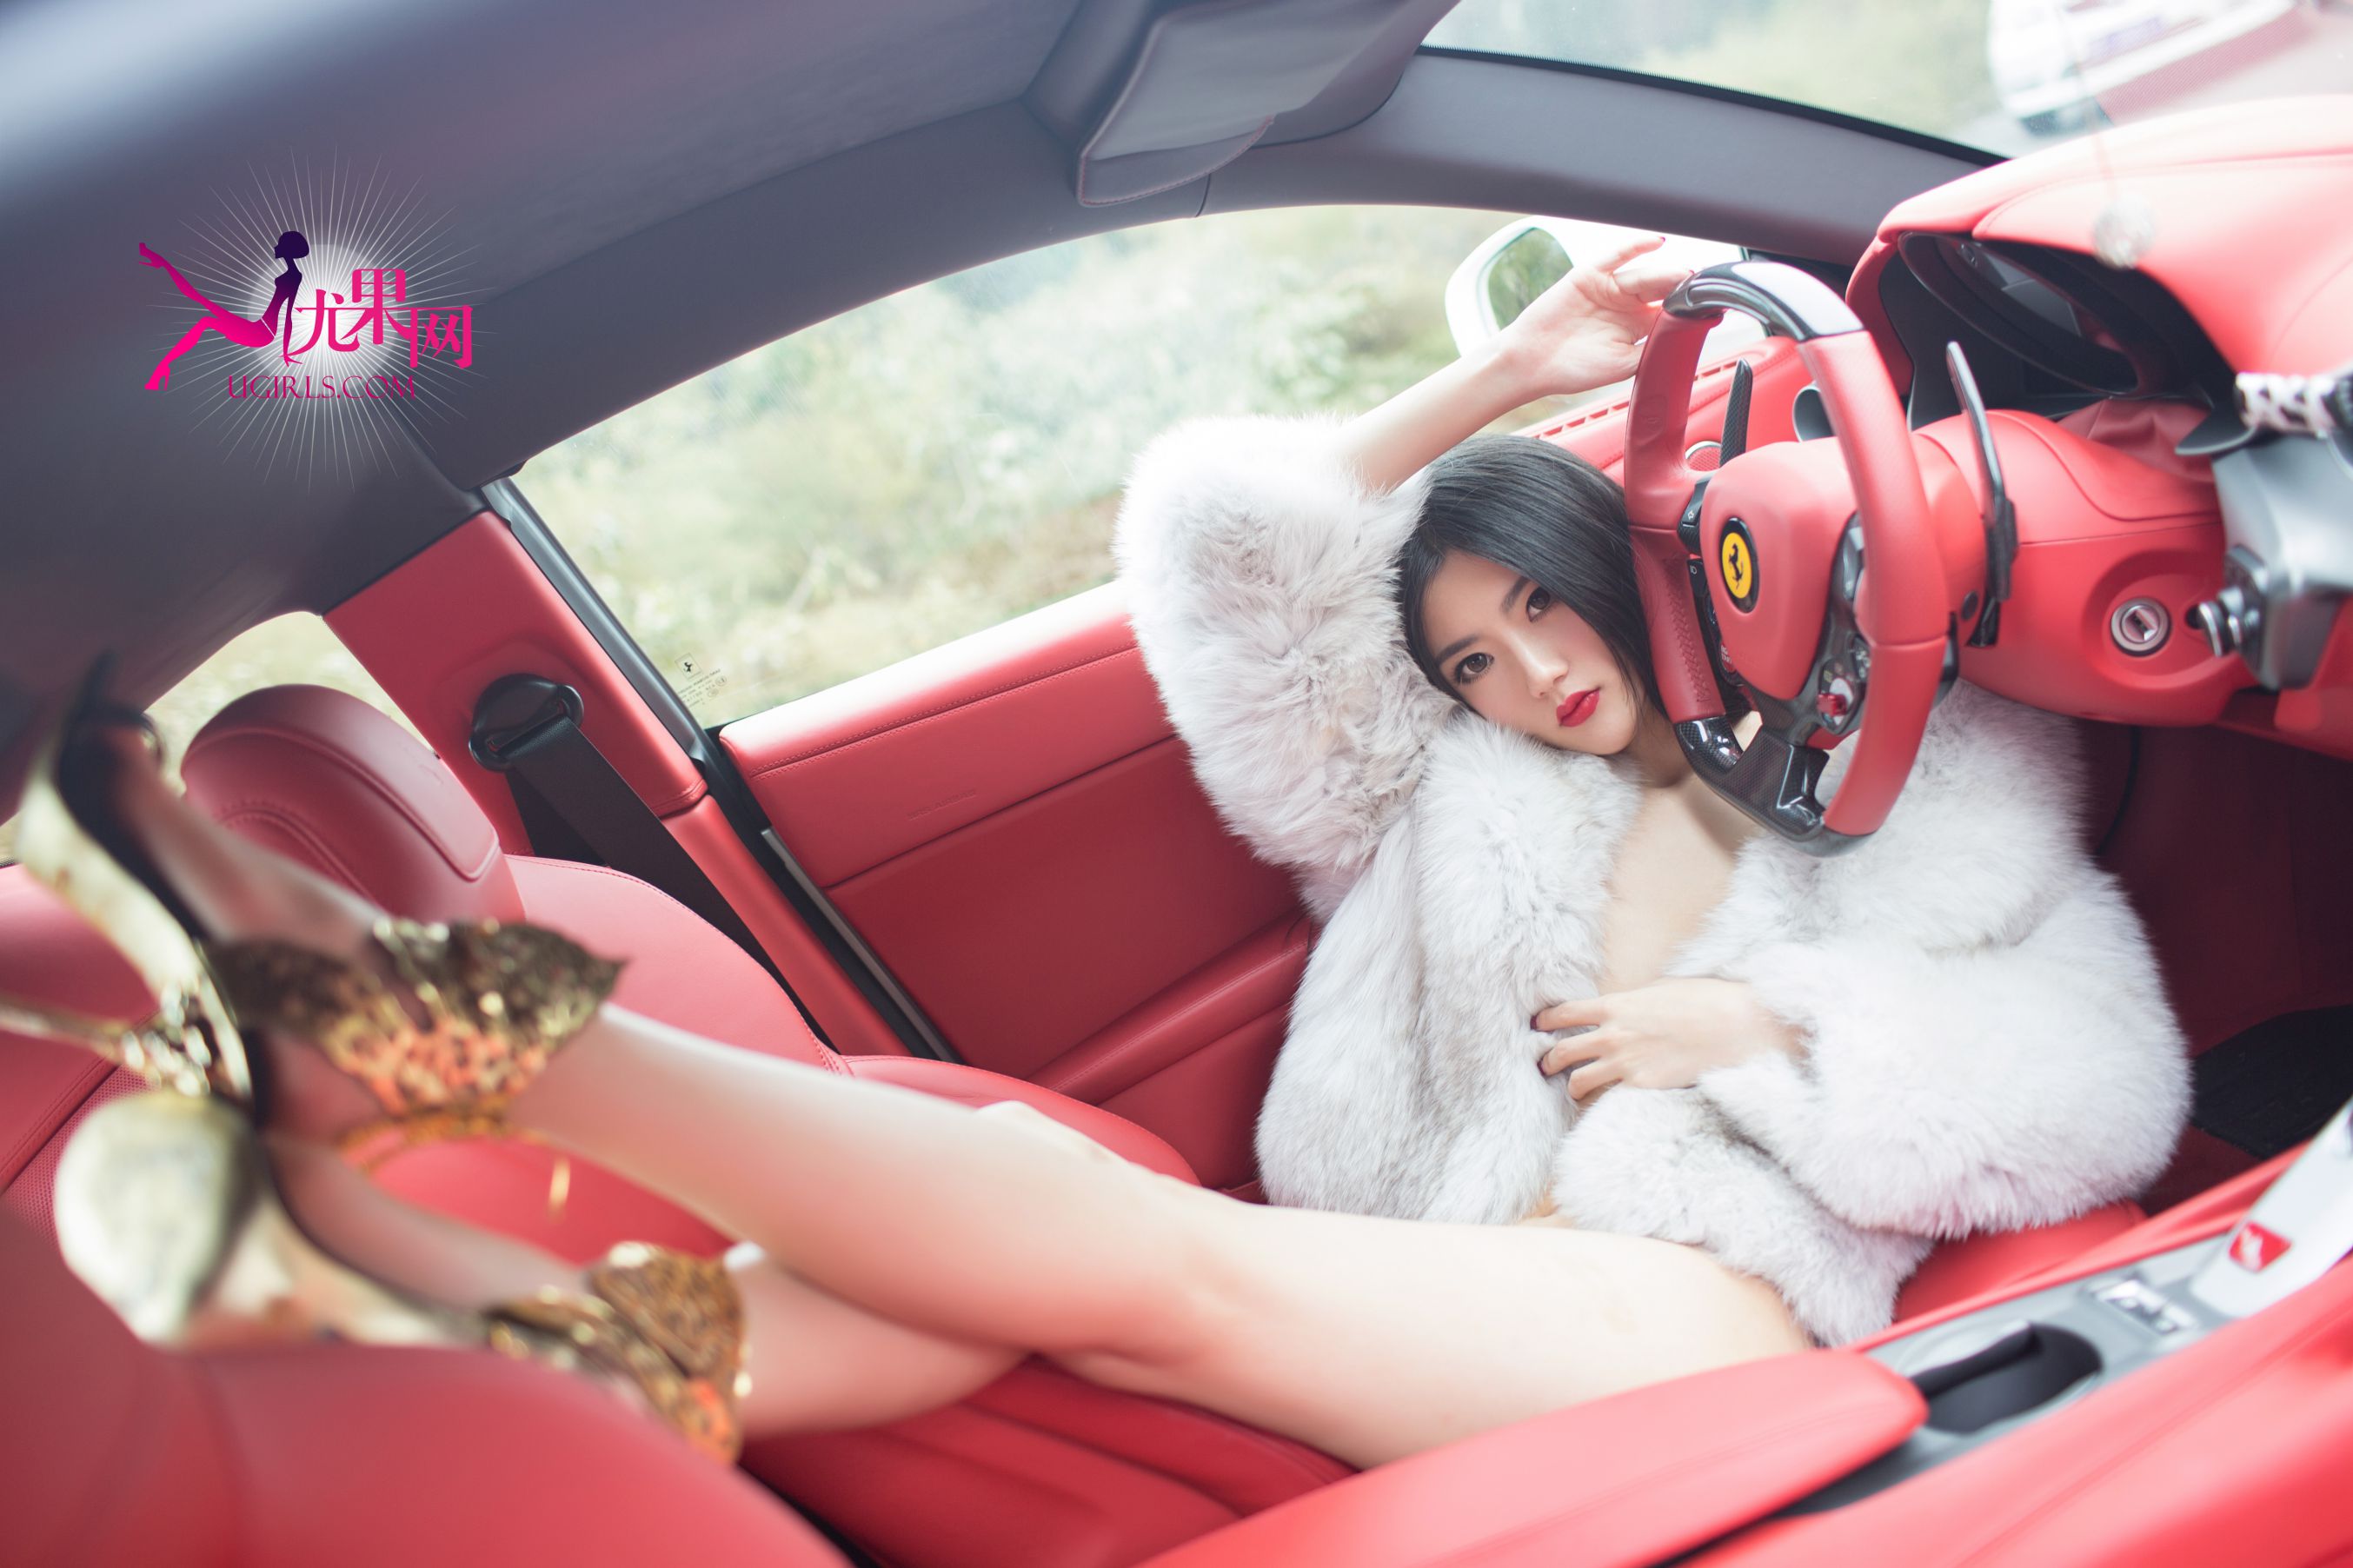 [Yugo.com Ugirls] E051 Jin Zixi “Beauty with Fragrant Shoulders, Crispy Breasts, Long Legs, and Sexy Contest with Luxury Cars” II Photo Album